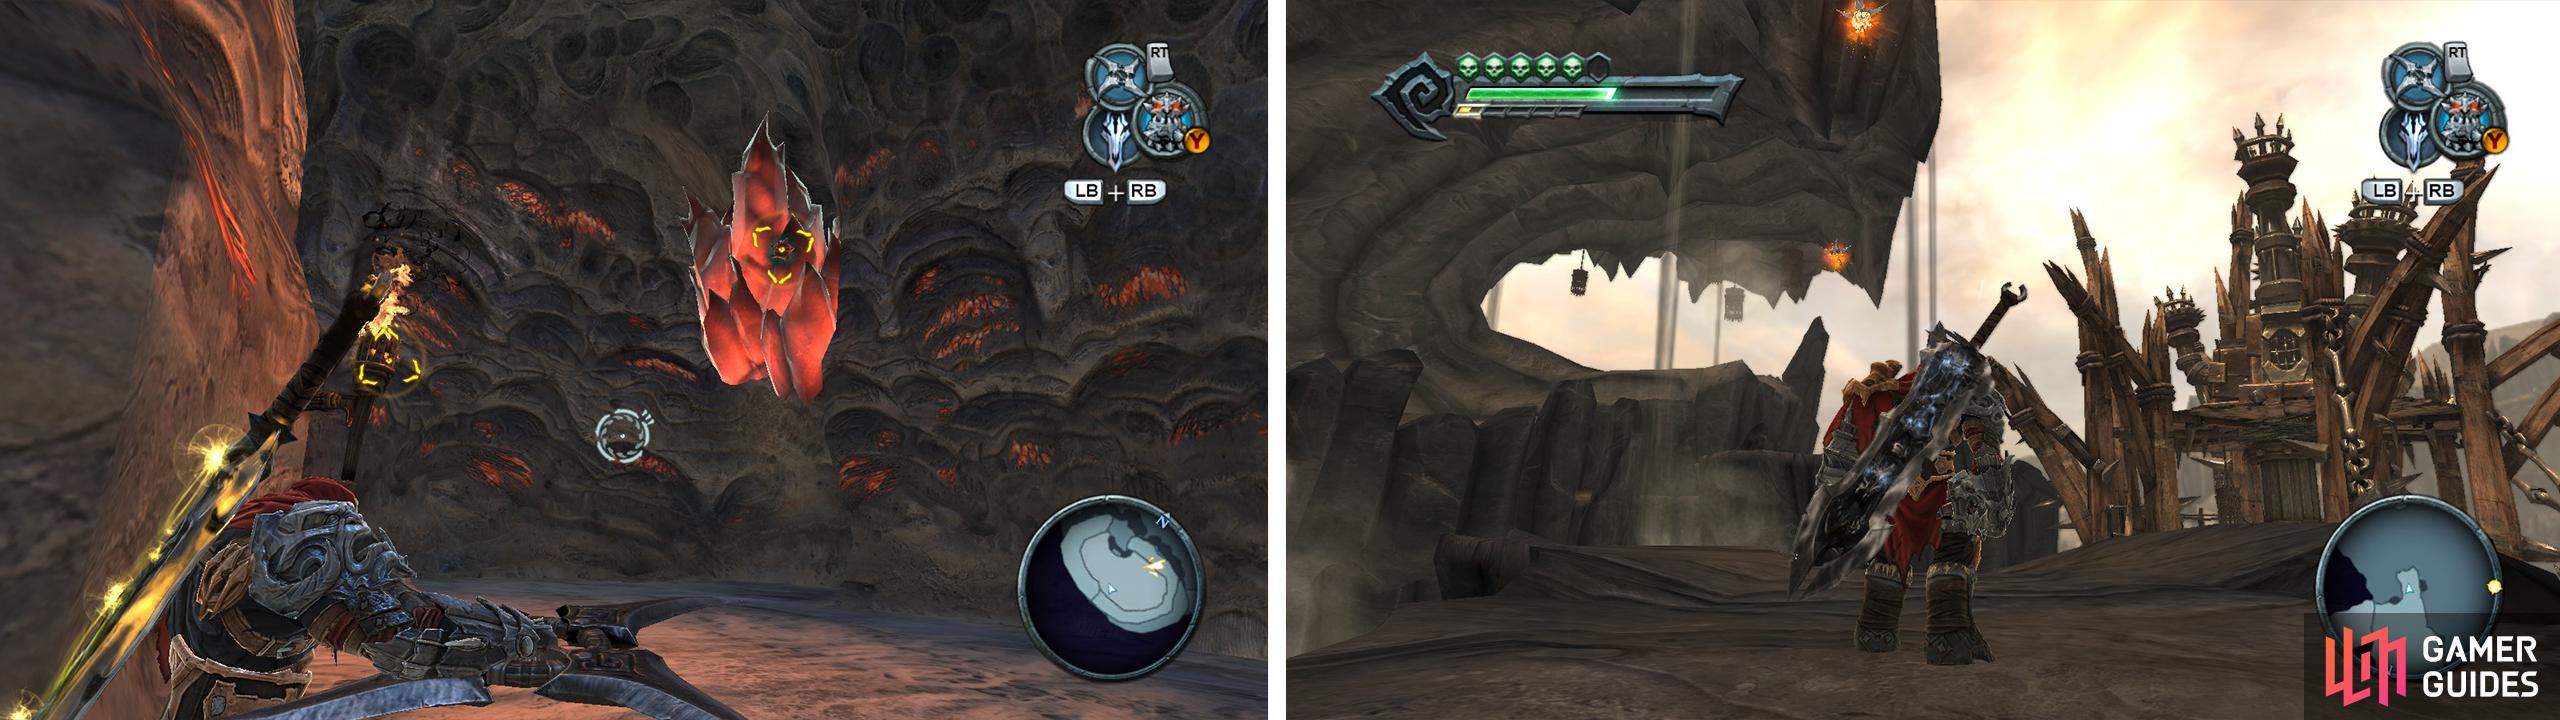 Destroy the red crystals (left) and follow the path to the top for an Armageddon Blade Shard. After using the shadowflight geyser in the middle of the Ash Lands, look for grapple points (right) leading to the Abyssal Armor.